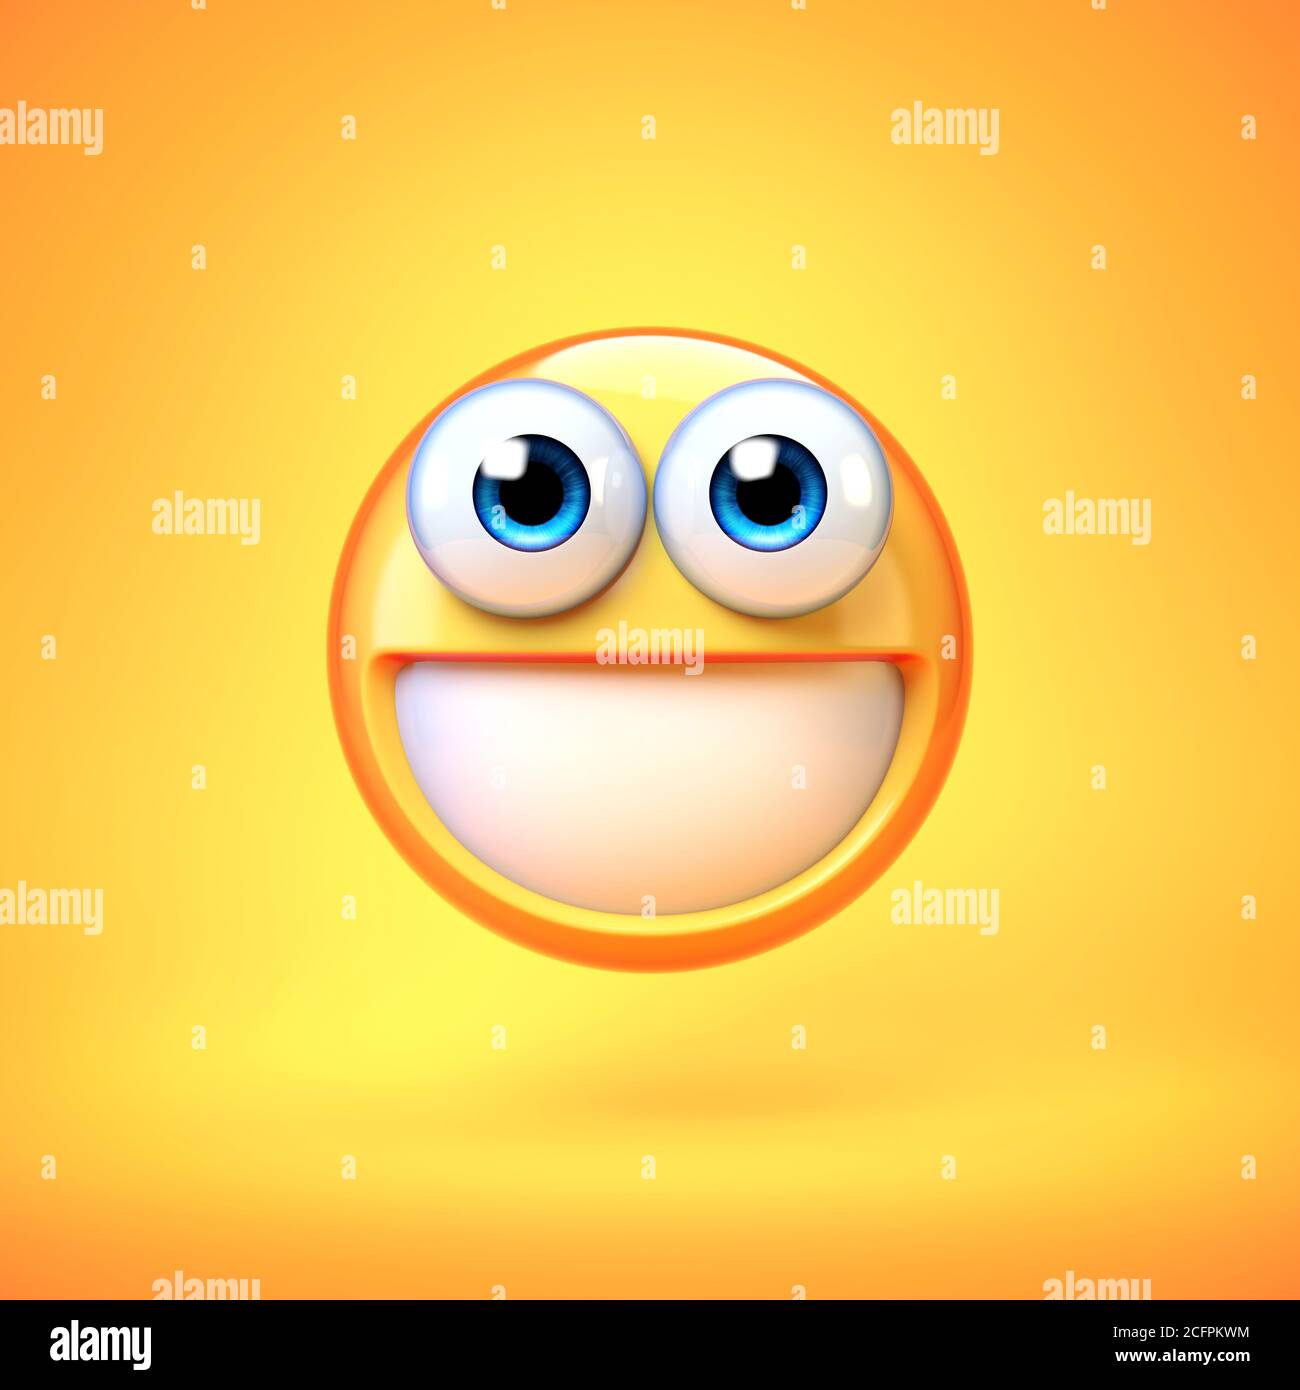 Smiling emoji isolated on yellow background, teeth emoticon 3d rendering Stock Photo